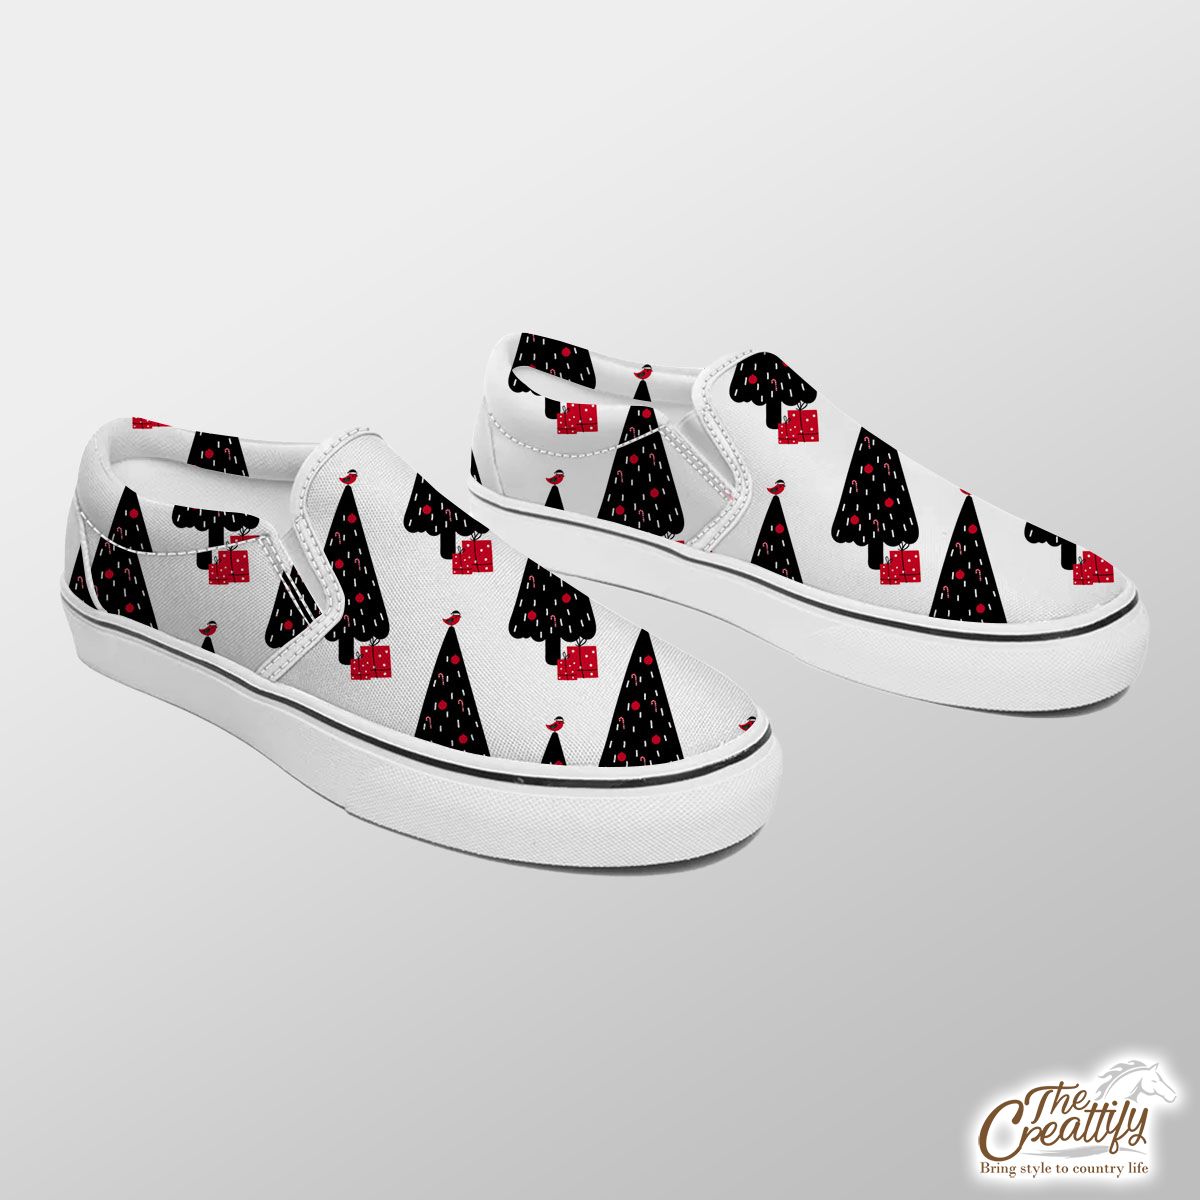 Hand Draw Christmas Gift And Pine Tree Silhouette Seamless White Pattern Slip On Sneakers